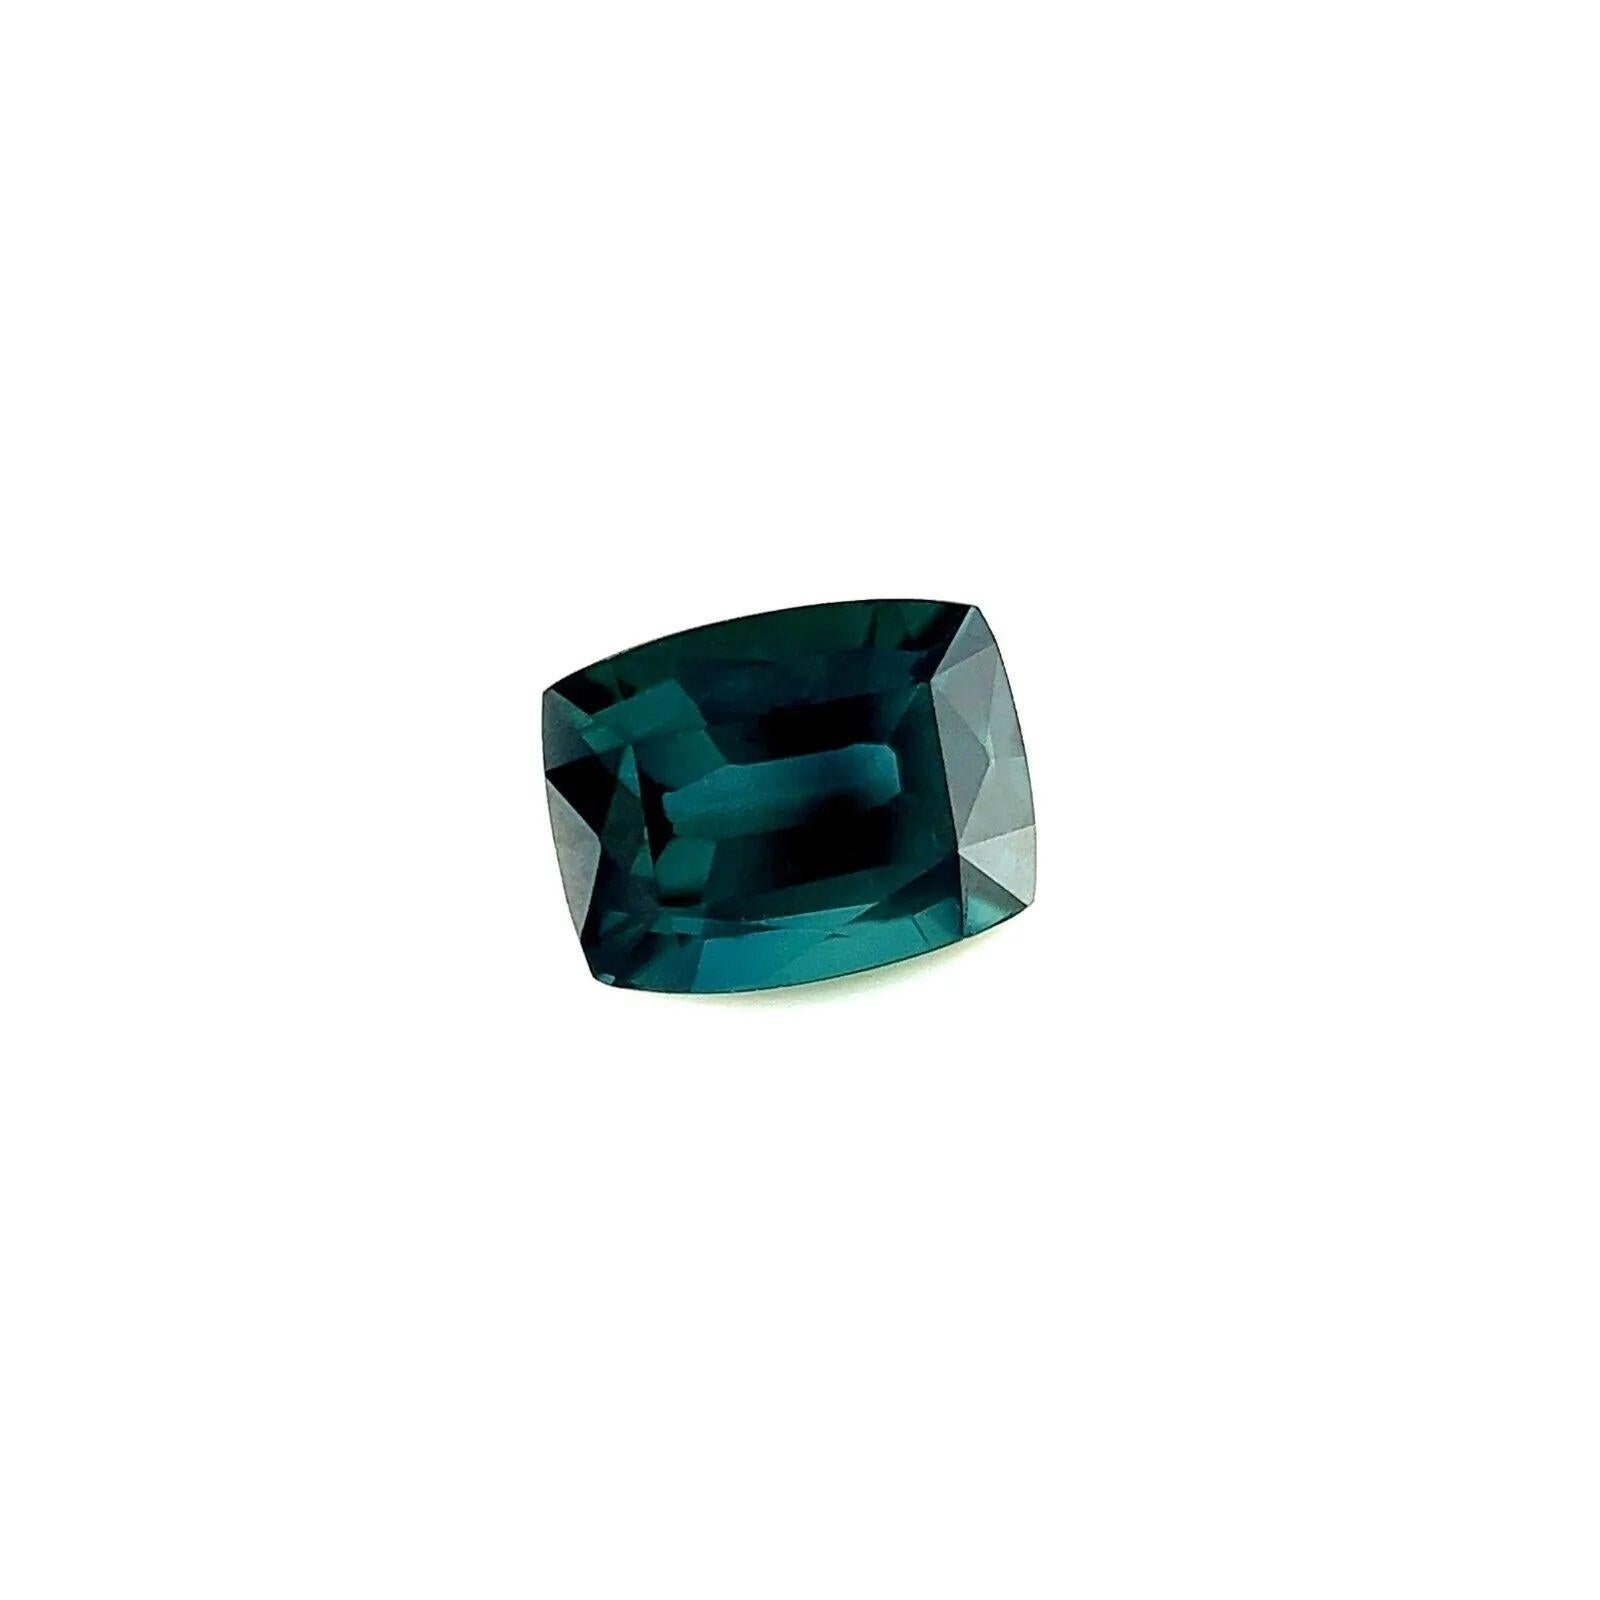 GRA Certified 1.04ct Green Blue Sapphire Rare Cushion Cut Gem 6.4x5mm VVS

GRA Certified Green Blue Sapphire Gemstone.
1.04 Carat sapphire with a beautiful deep greenish blue colour.
Fully certified by GRA confirming stone as natural.
This sapphire